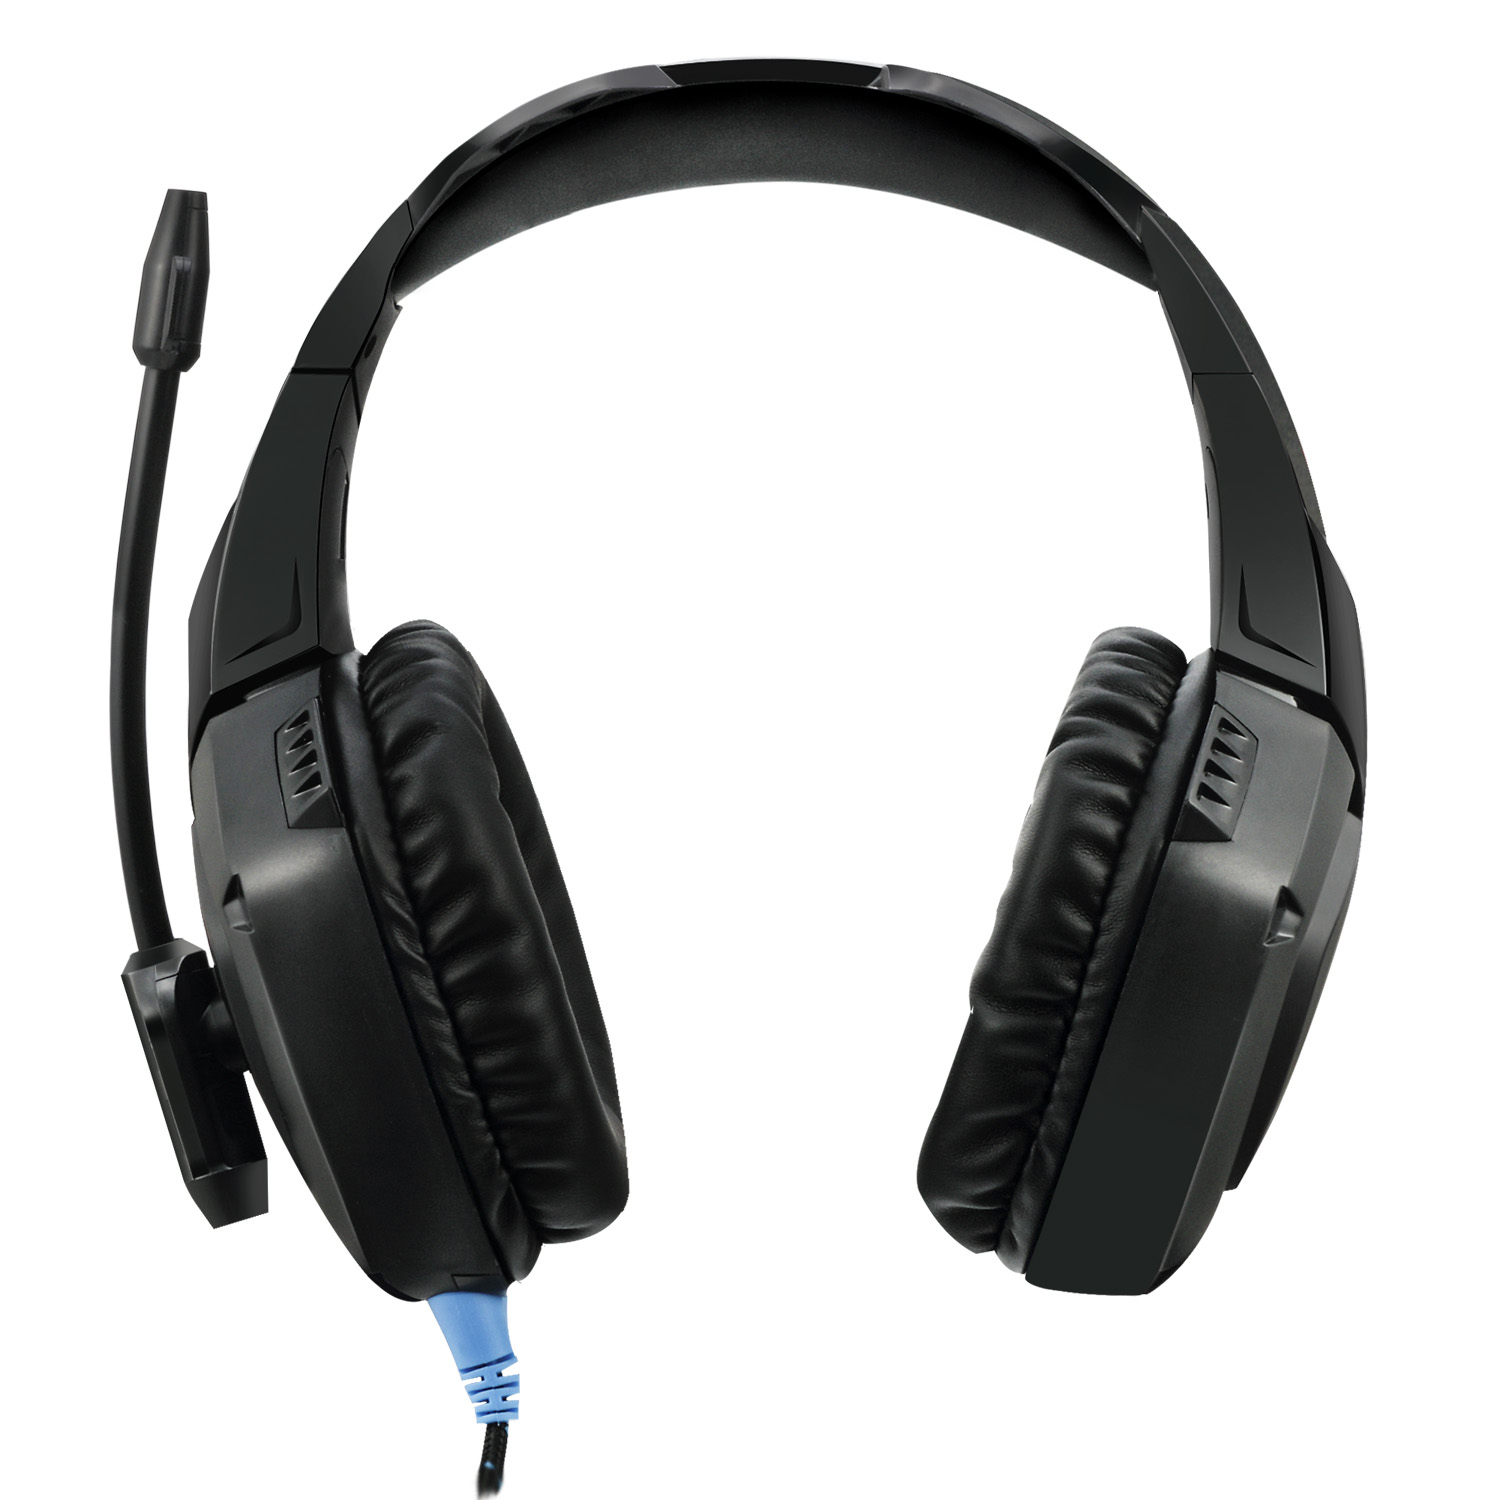 ADESSO Xtream G1, Gaming Over-ear schwarz Headset